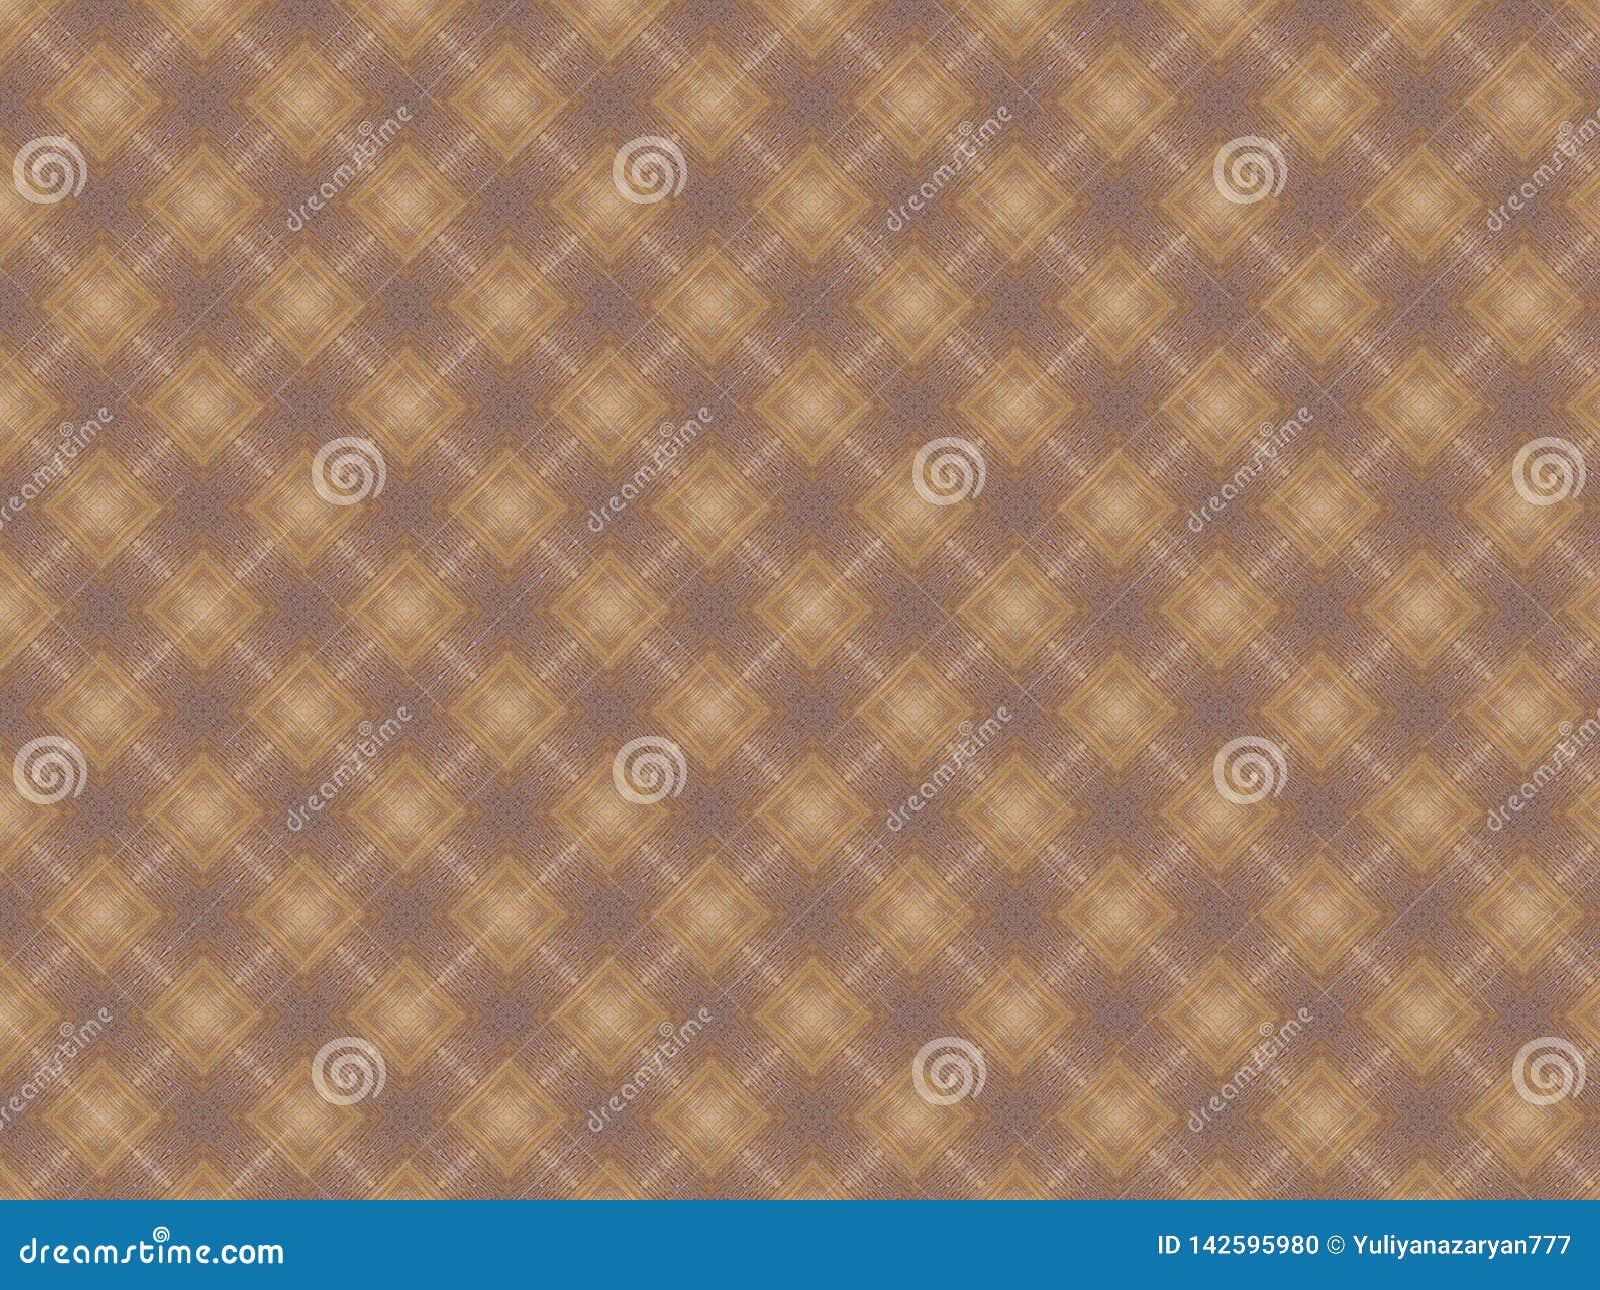 Floor Covering Glossy Abstract Background With Geometric Pattern